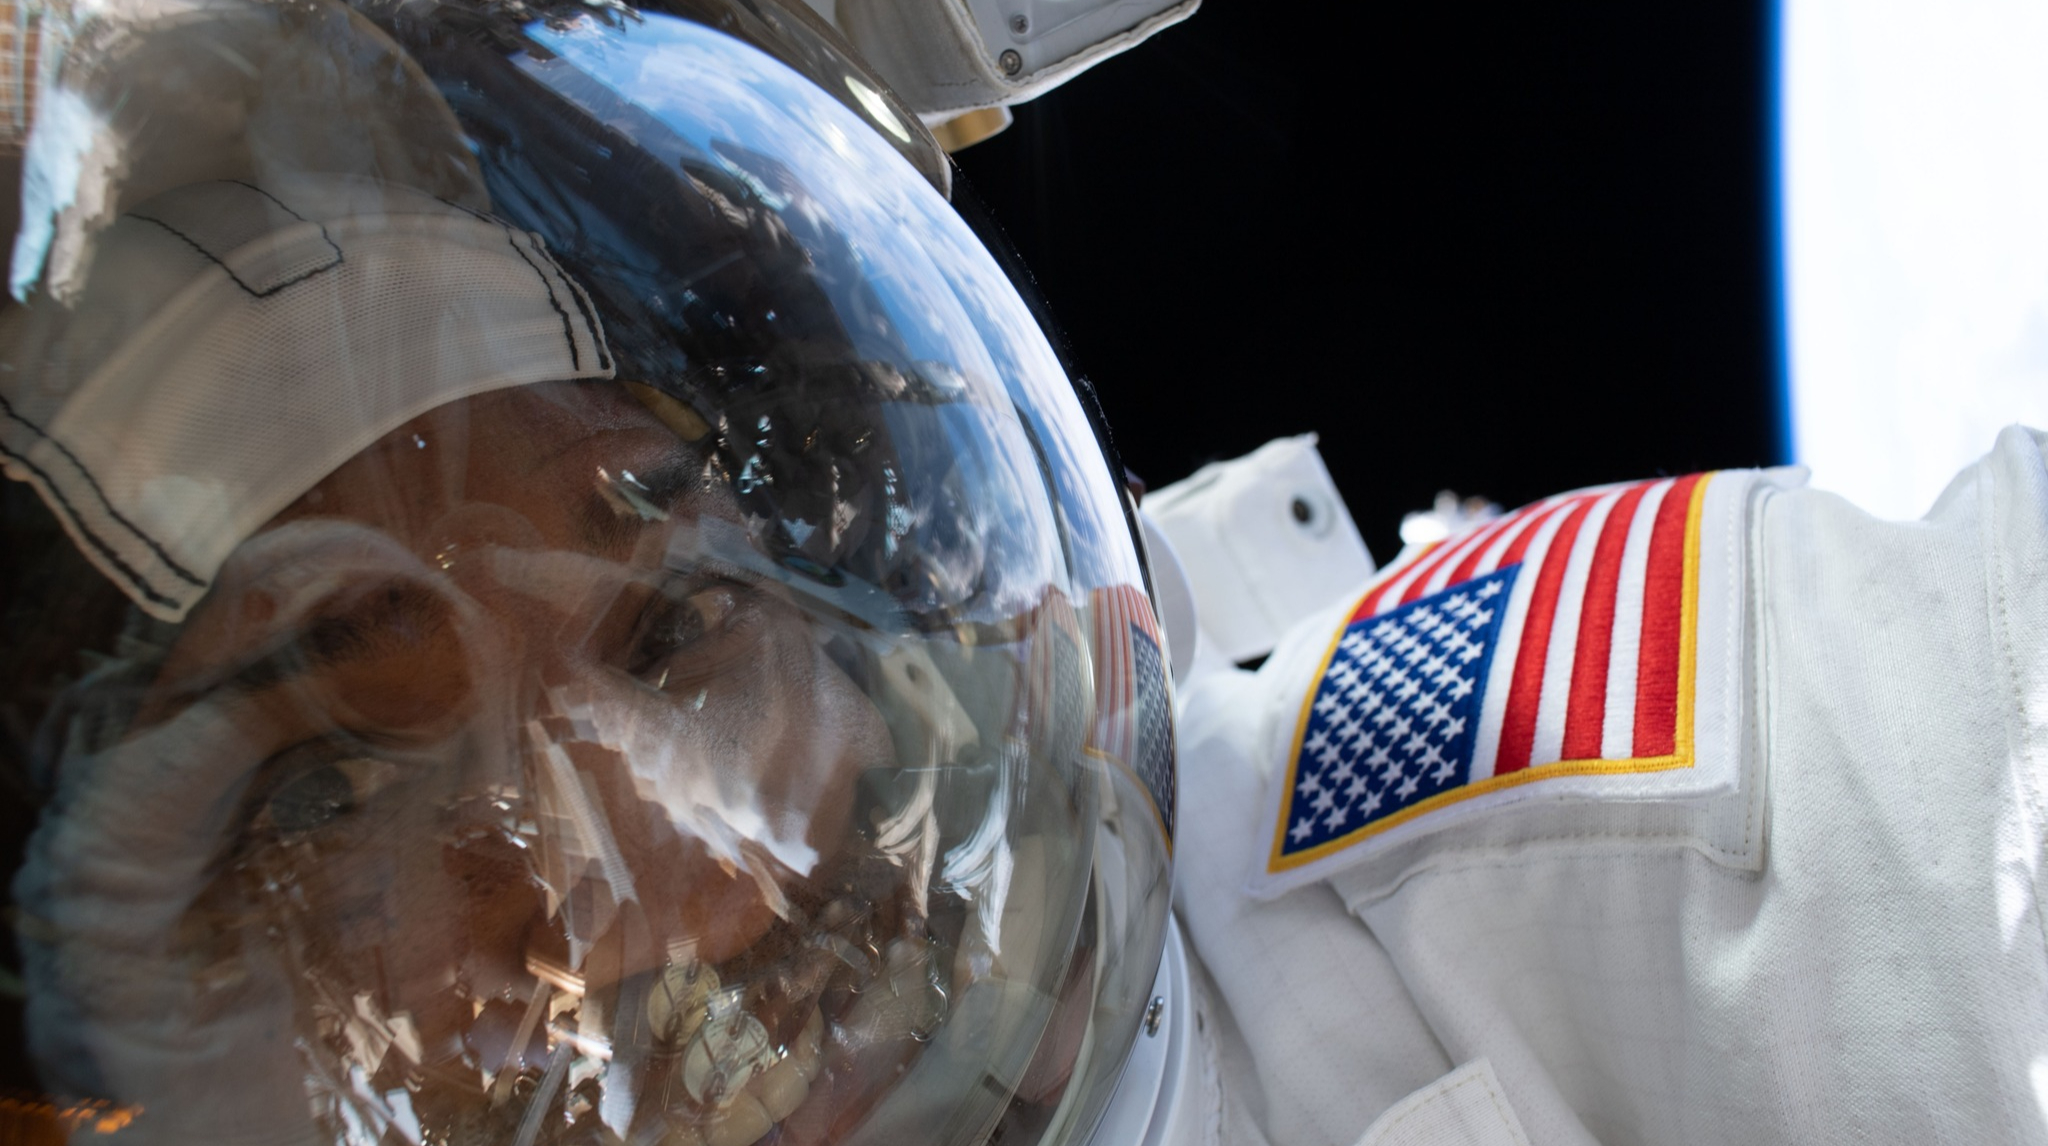 NASA has announced the recruitment of the next group of astronauts: details